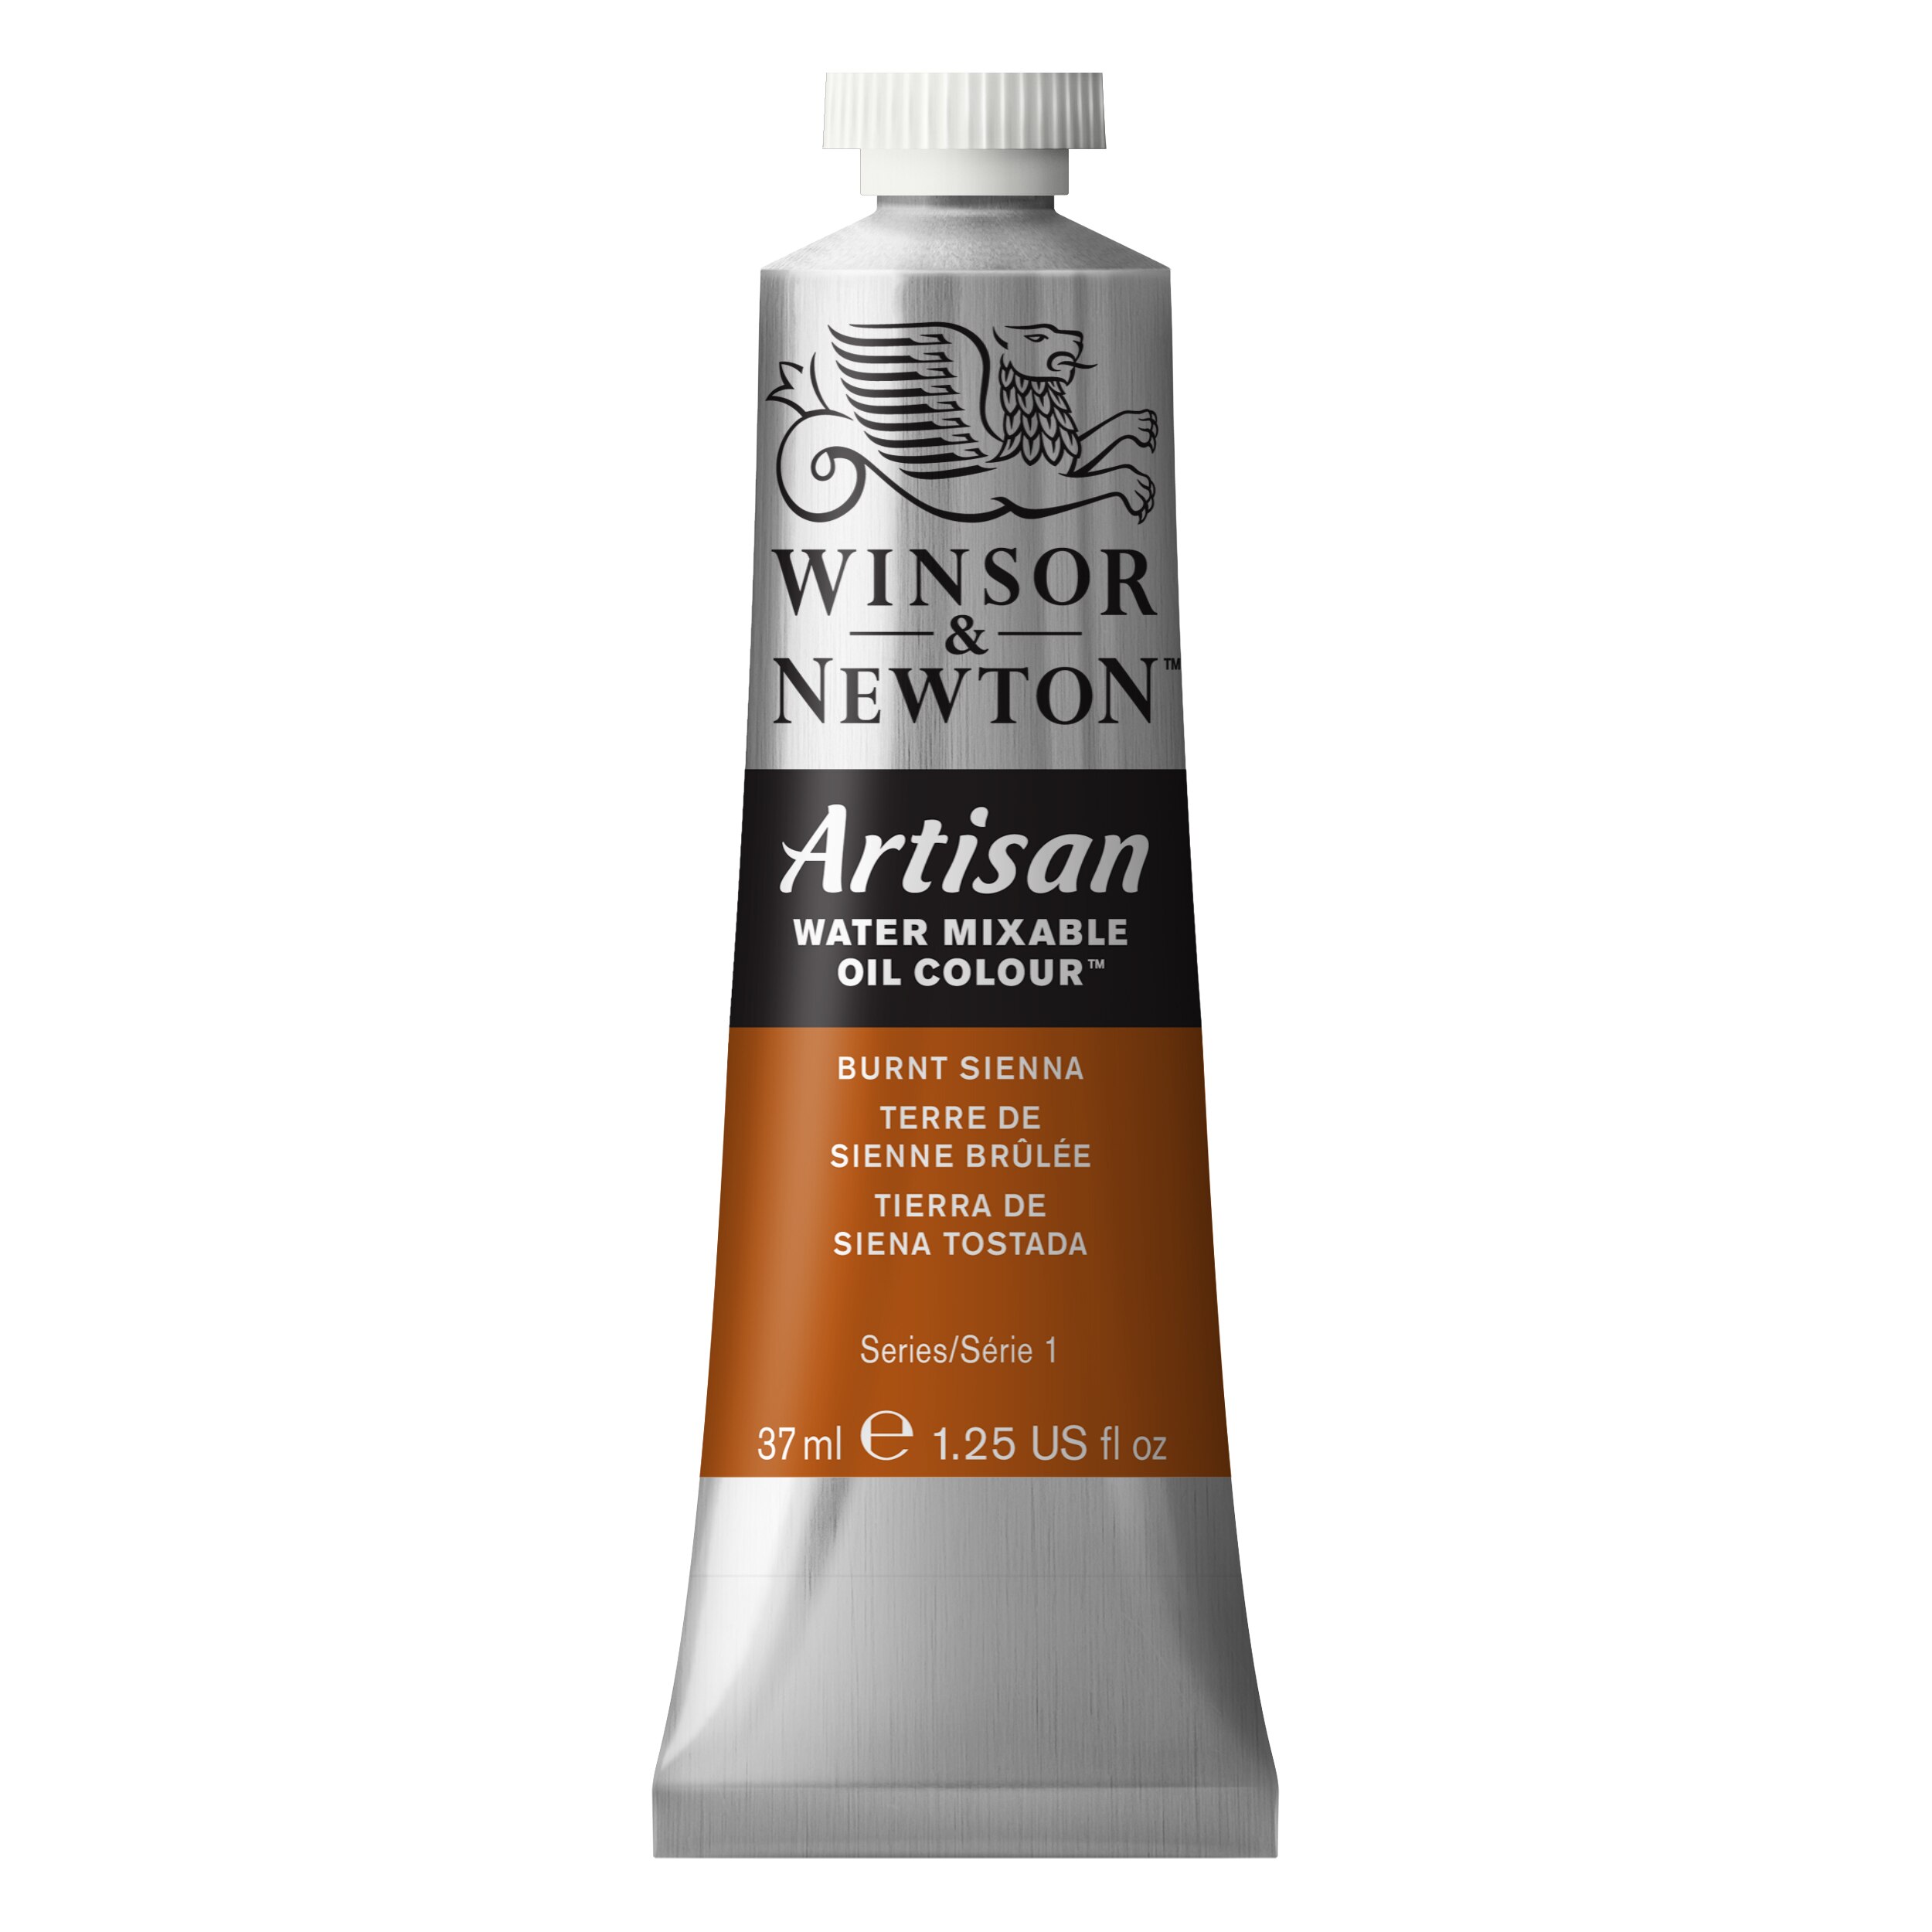 Winsor & Newton Artisan Water Mixable Oil Color, 37ml, Burnt Sienna